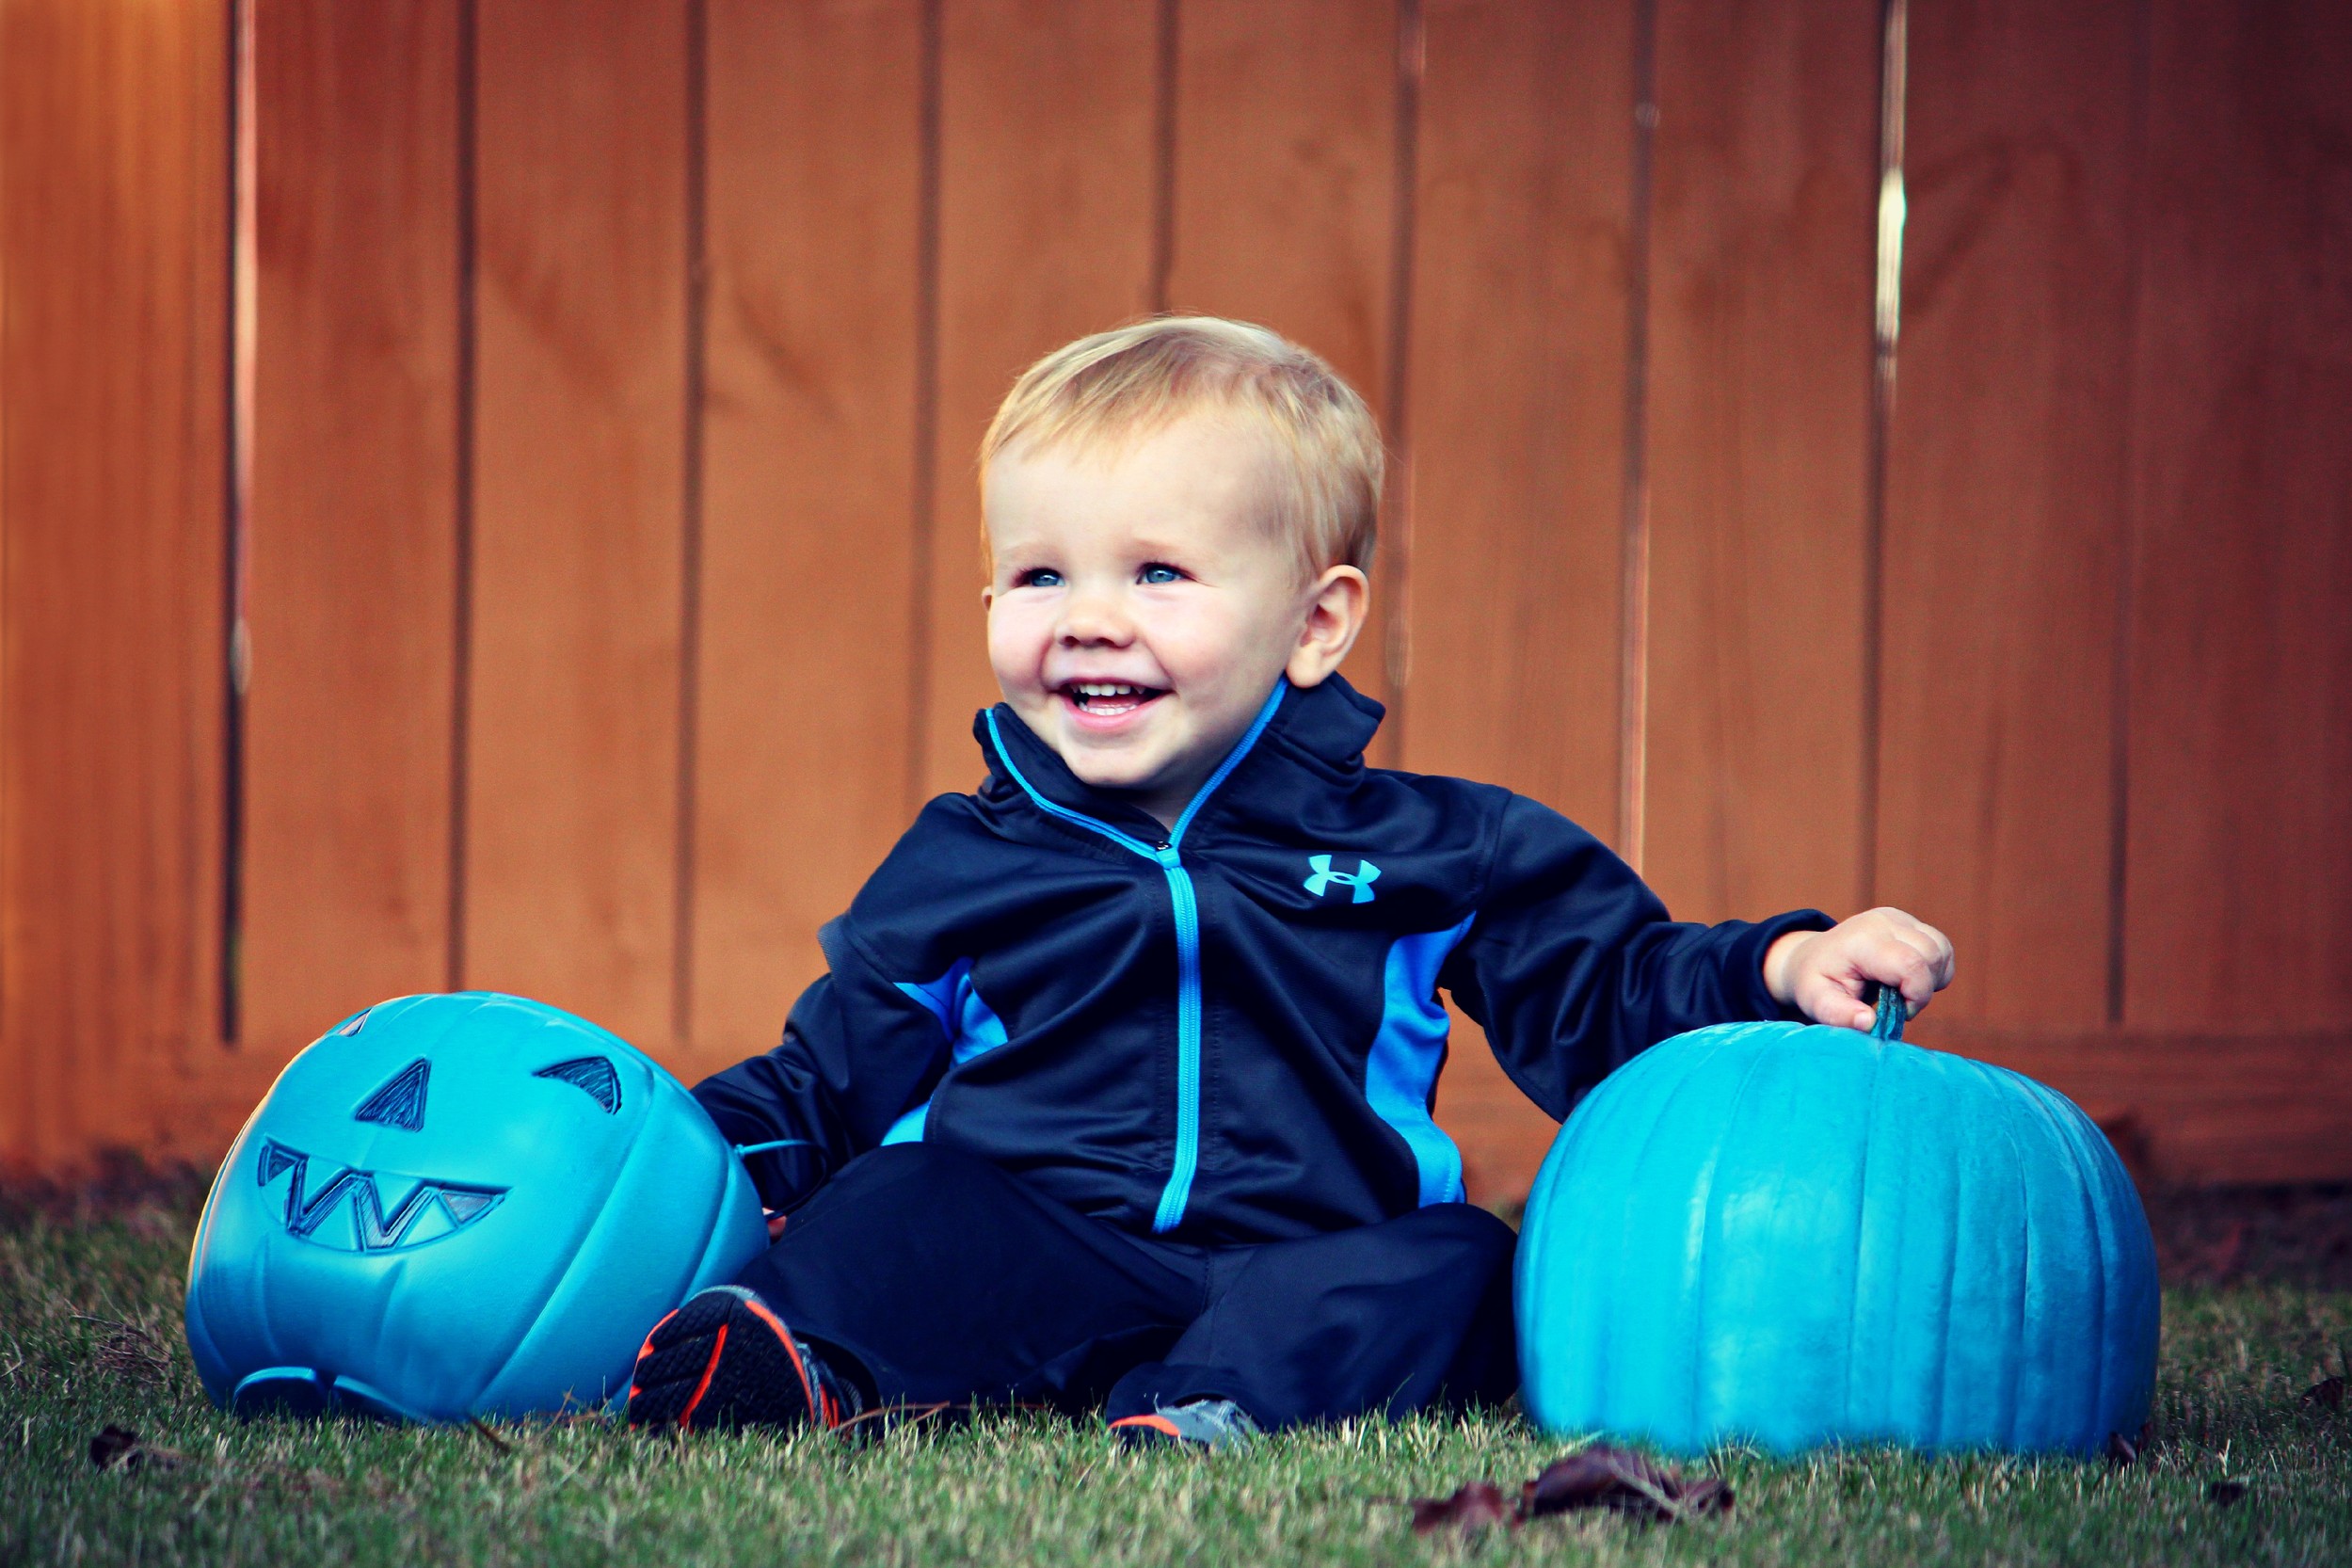 Jake Lunsford, 3, with teal pumpkins